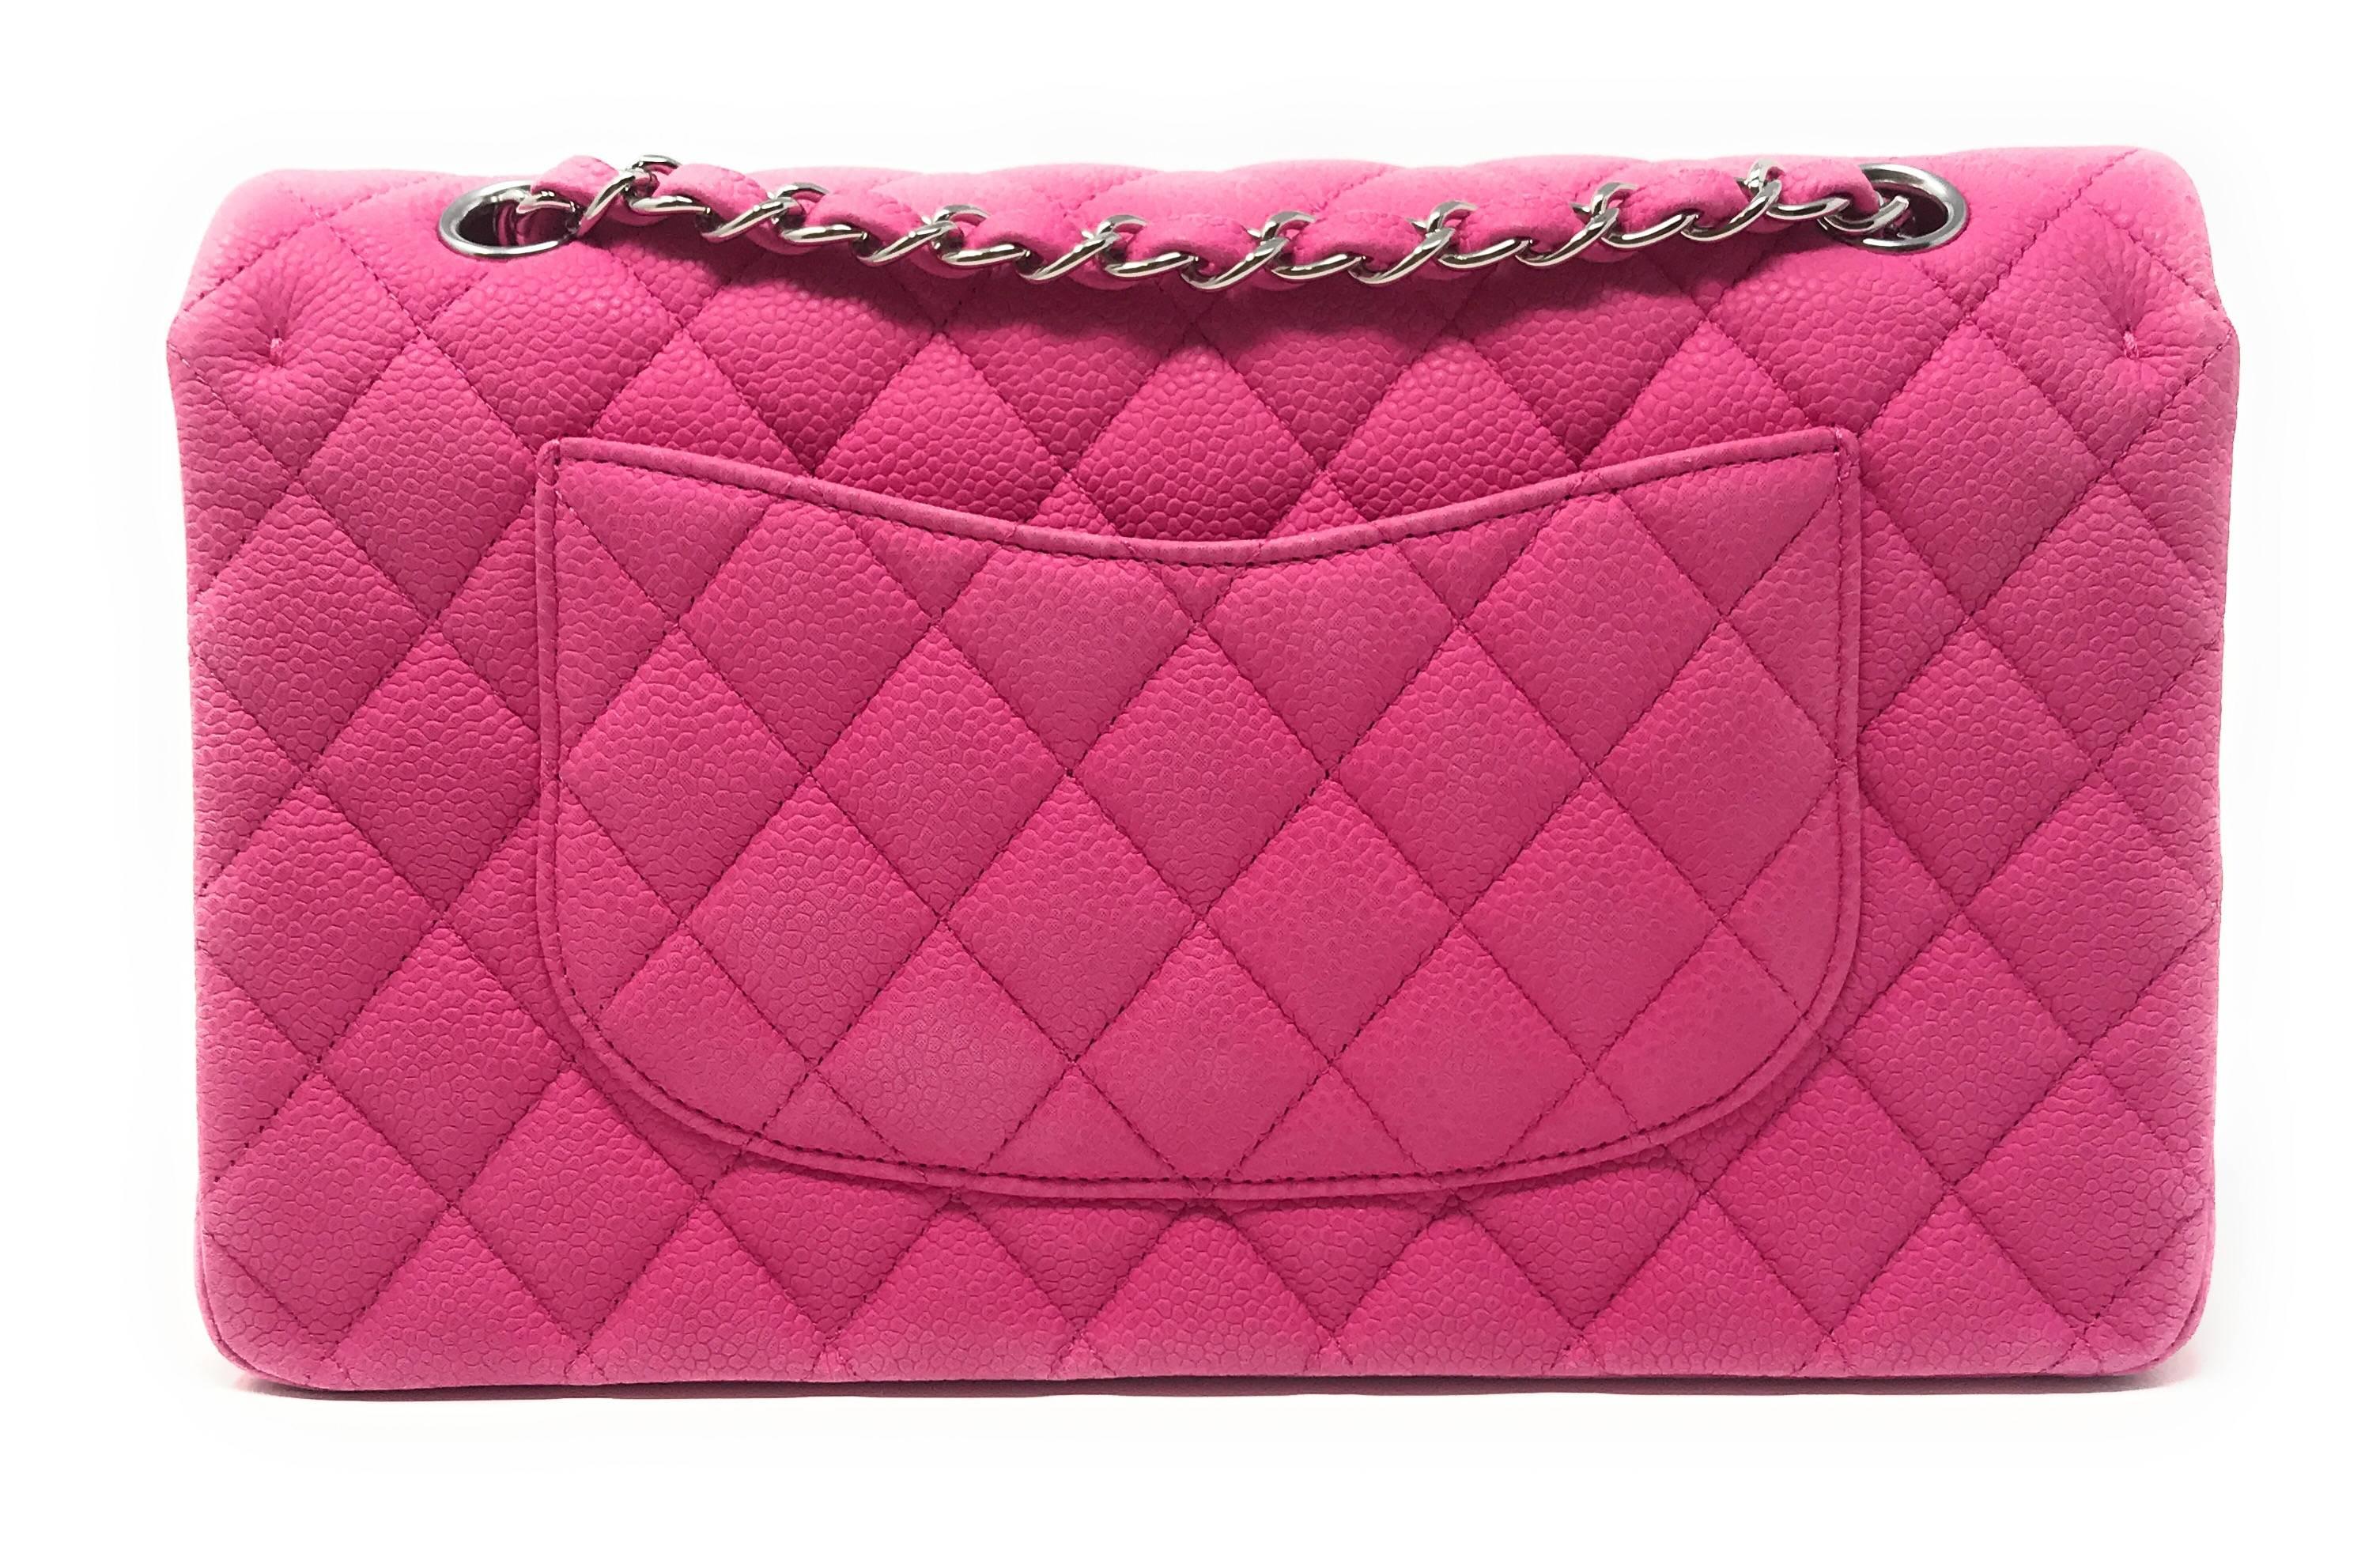 A pop of hot pink! The classic double flap Chanel bag crafted in hot pink matte caviar leather in the medium size. It features a frontal flap, multiple interior compartments and pockets (one zippered), back exterior slit pocket, and an adjustable